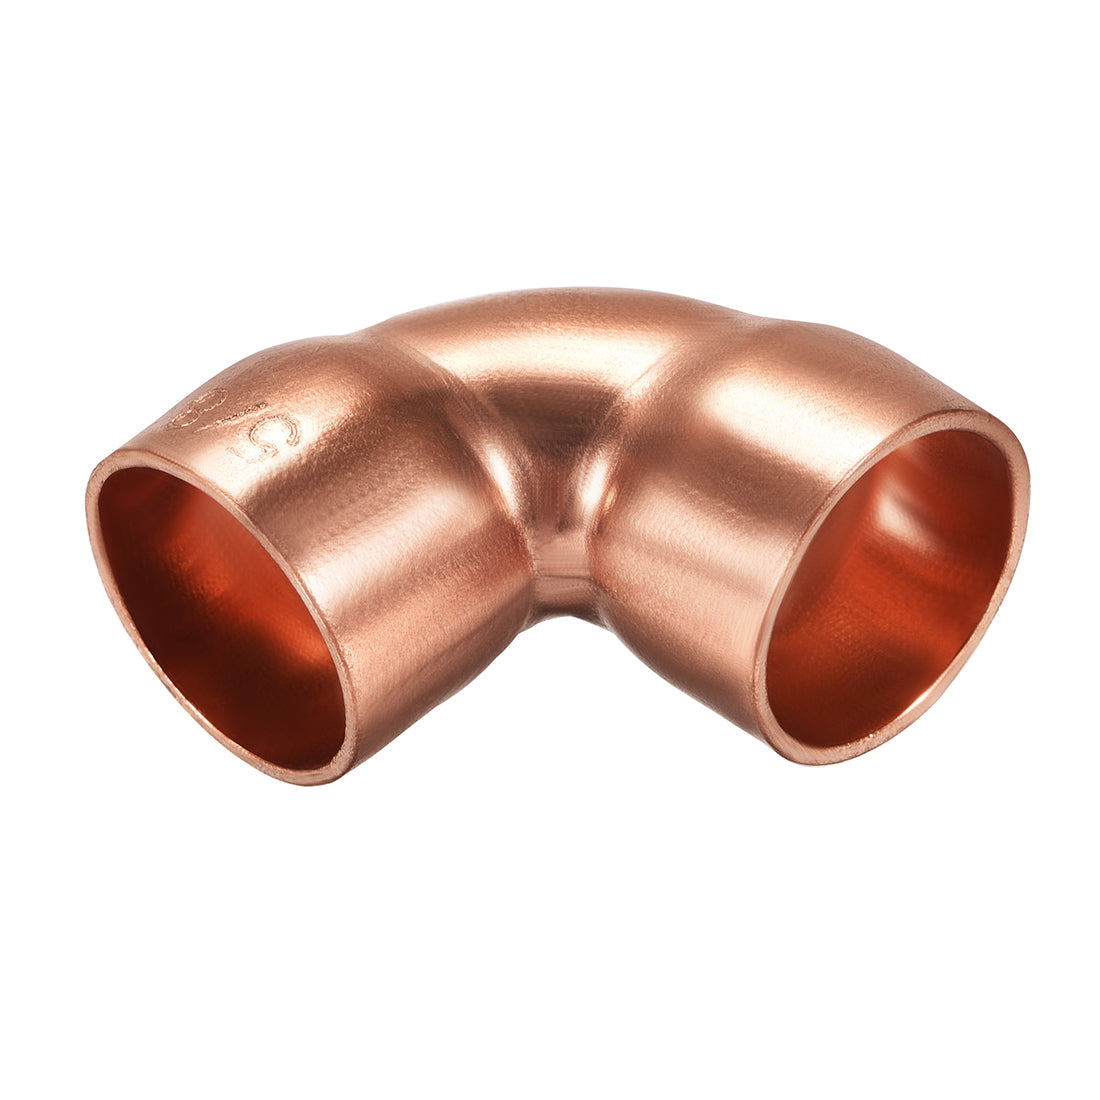 uxcell Uxcell 15.9mm ID 90 Degree Copper Elbow Pipe Fitting Connector 5pcs